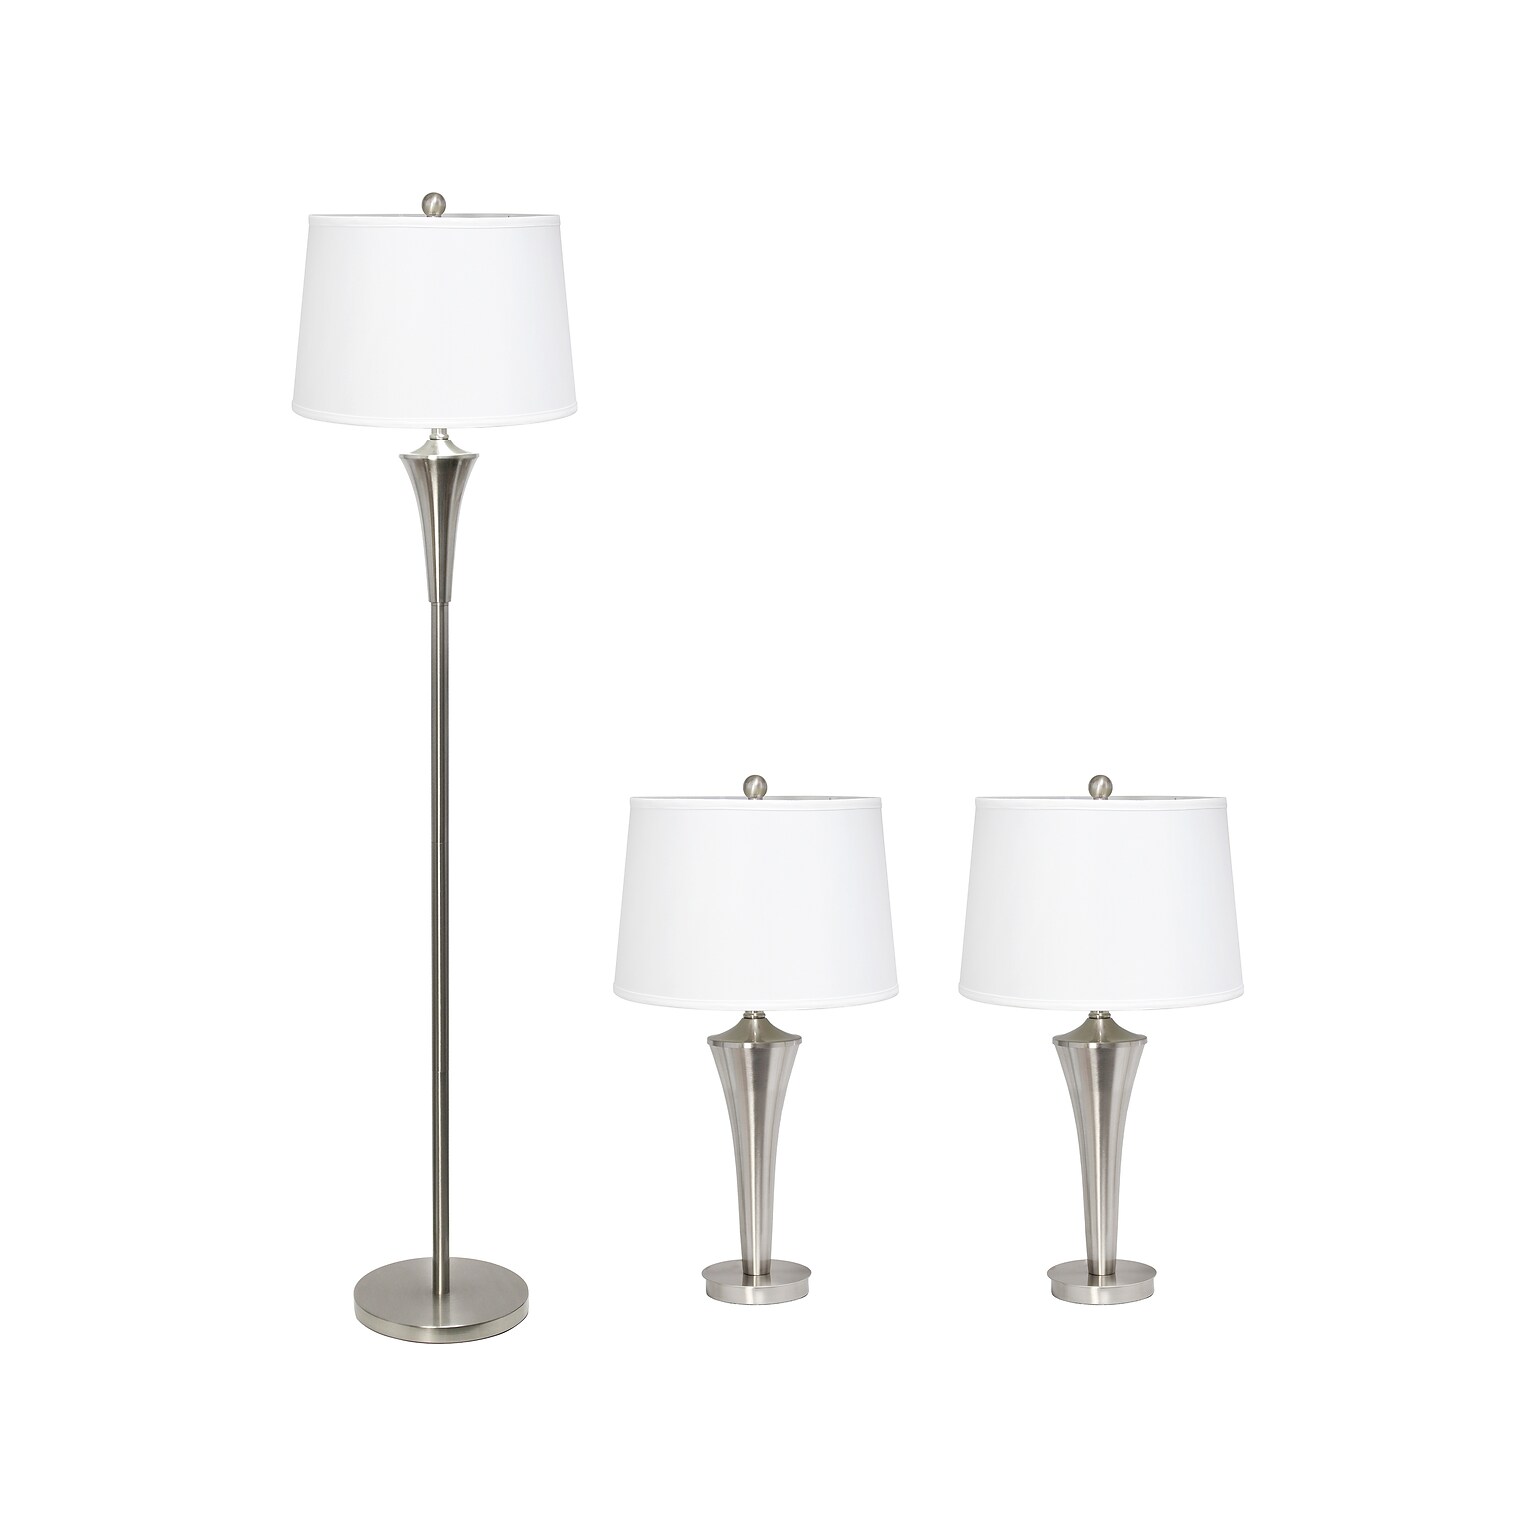 Lalia Home Perennial 62/27.25 Brushed Nickel Three-Piece Floor/Table Lamp Set with Tapered Shades (LHS-1008-BN)